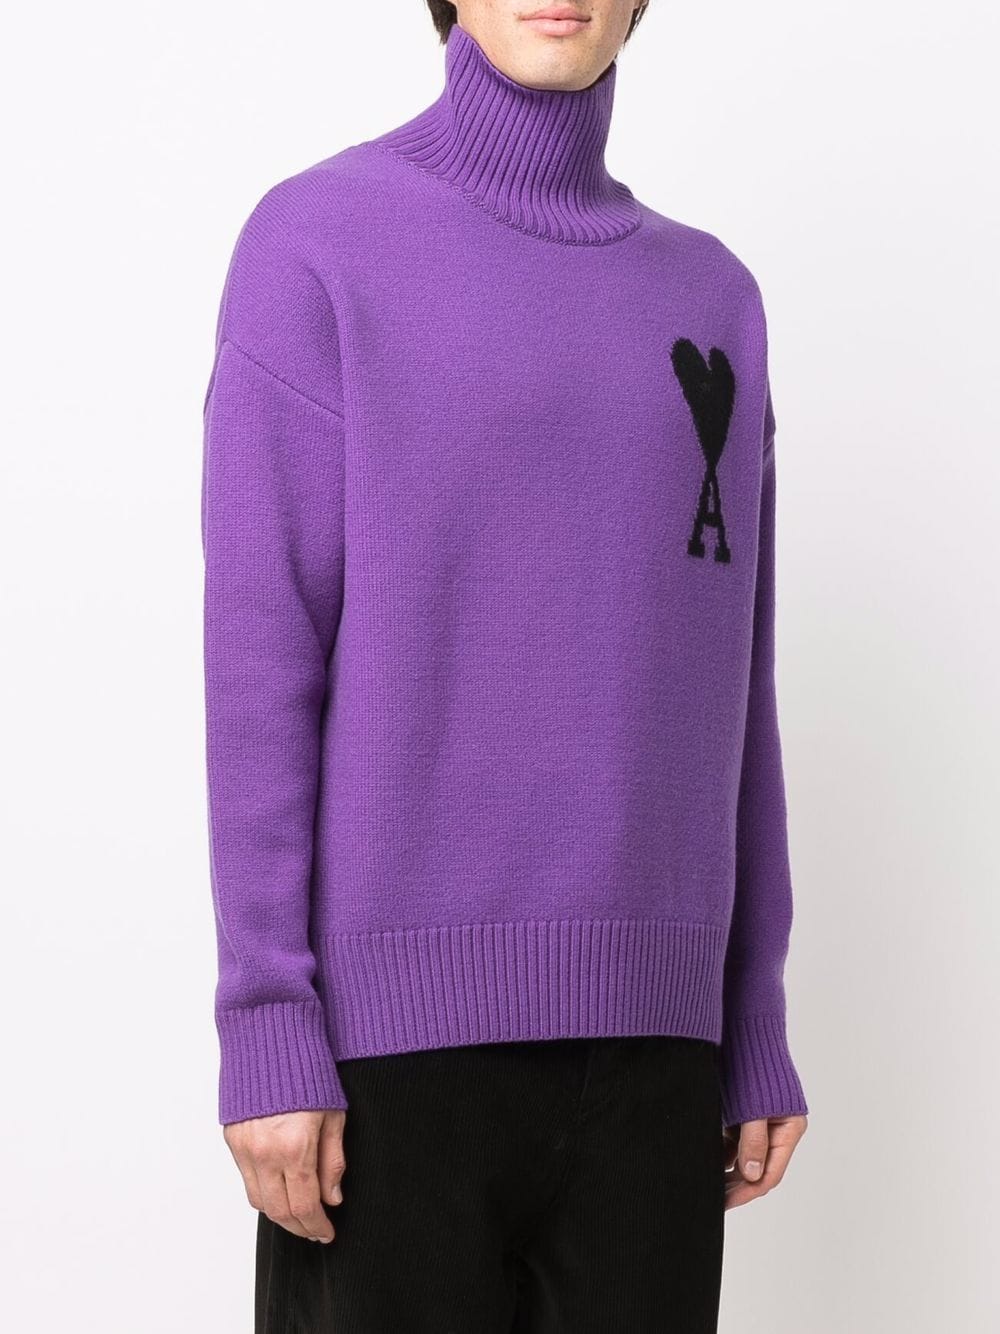 AMI PARIS EMBROIDERED ROLL NECK SWEATER